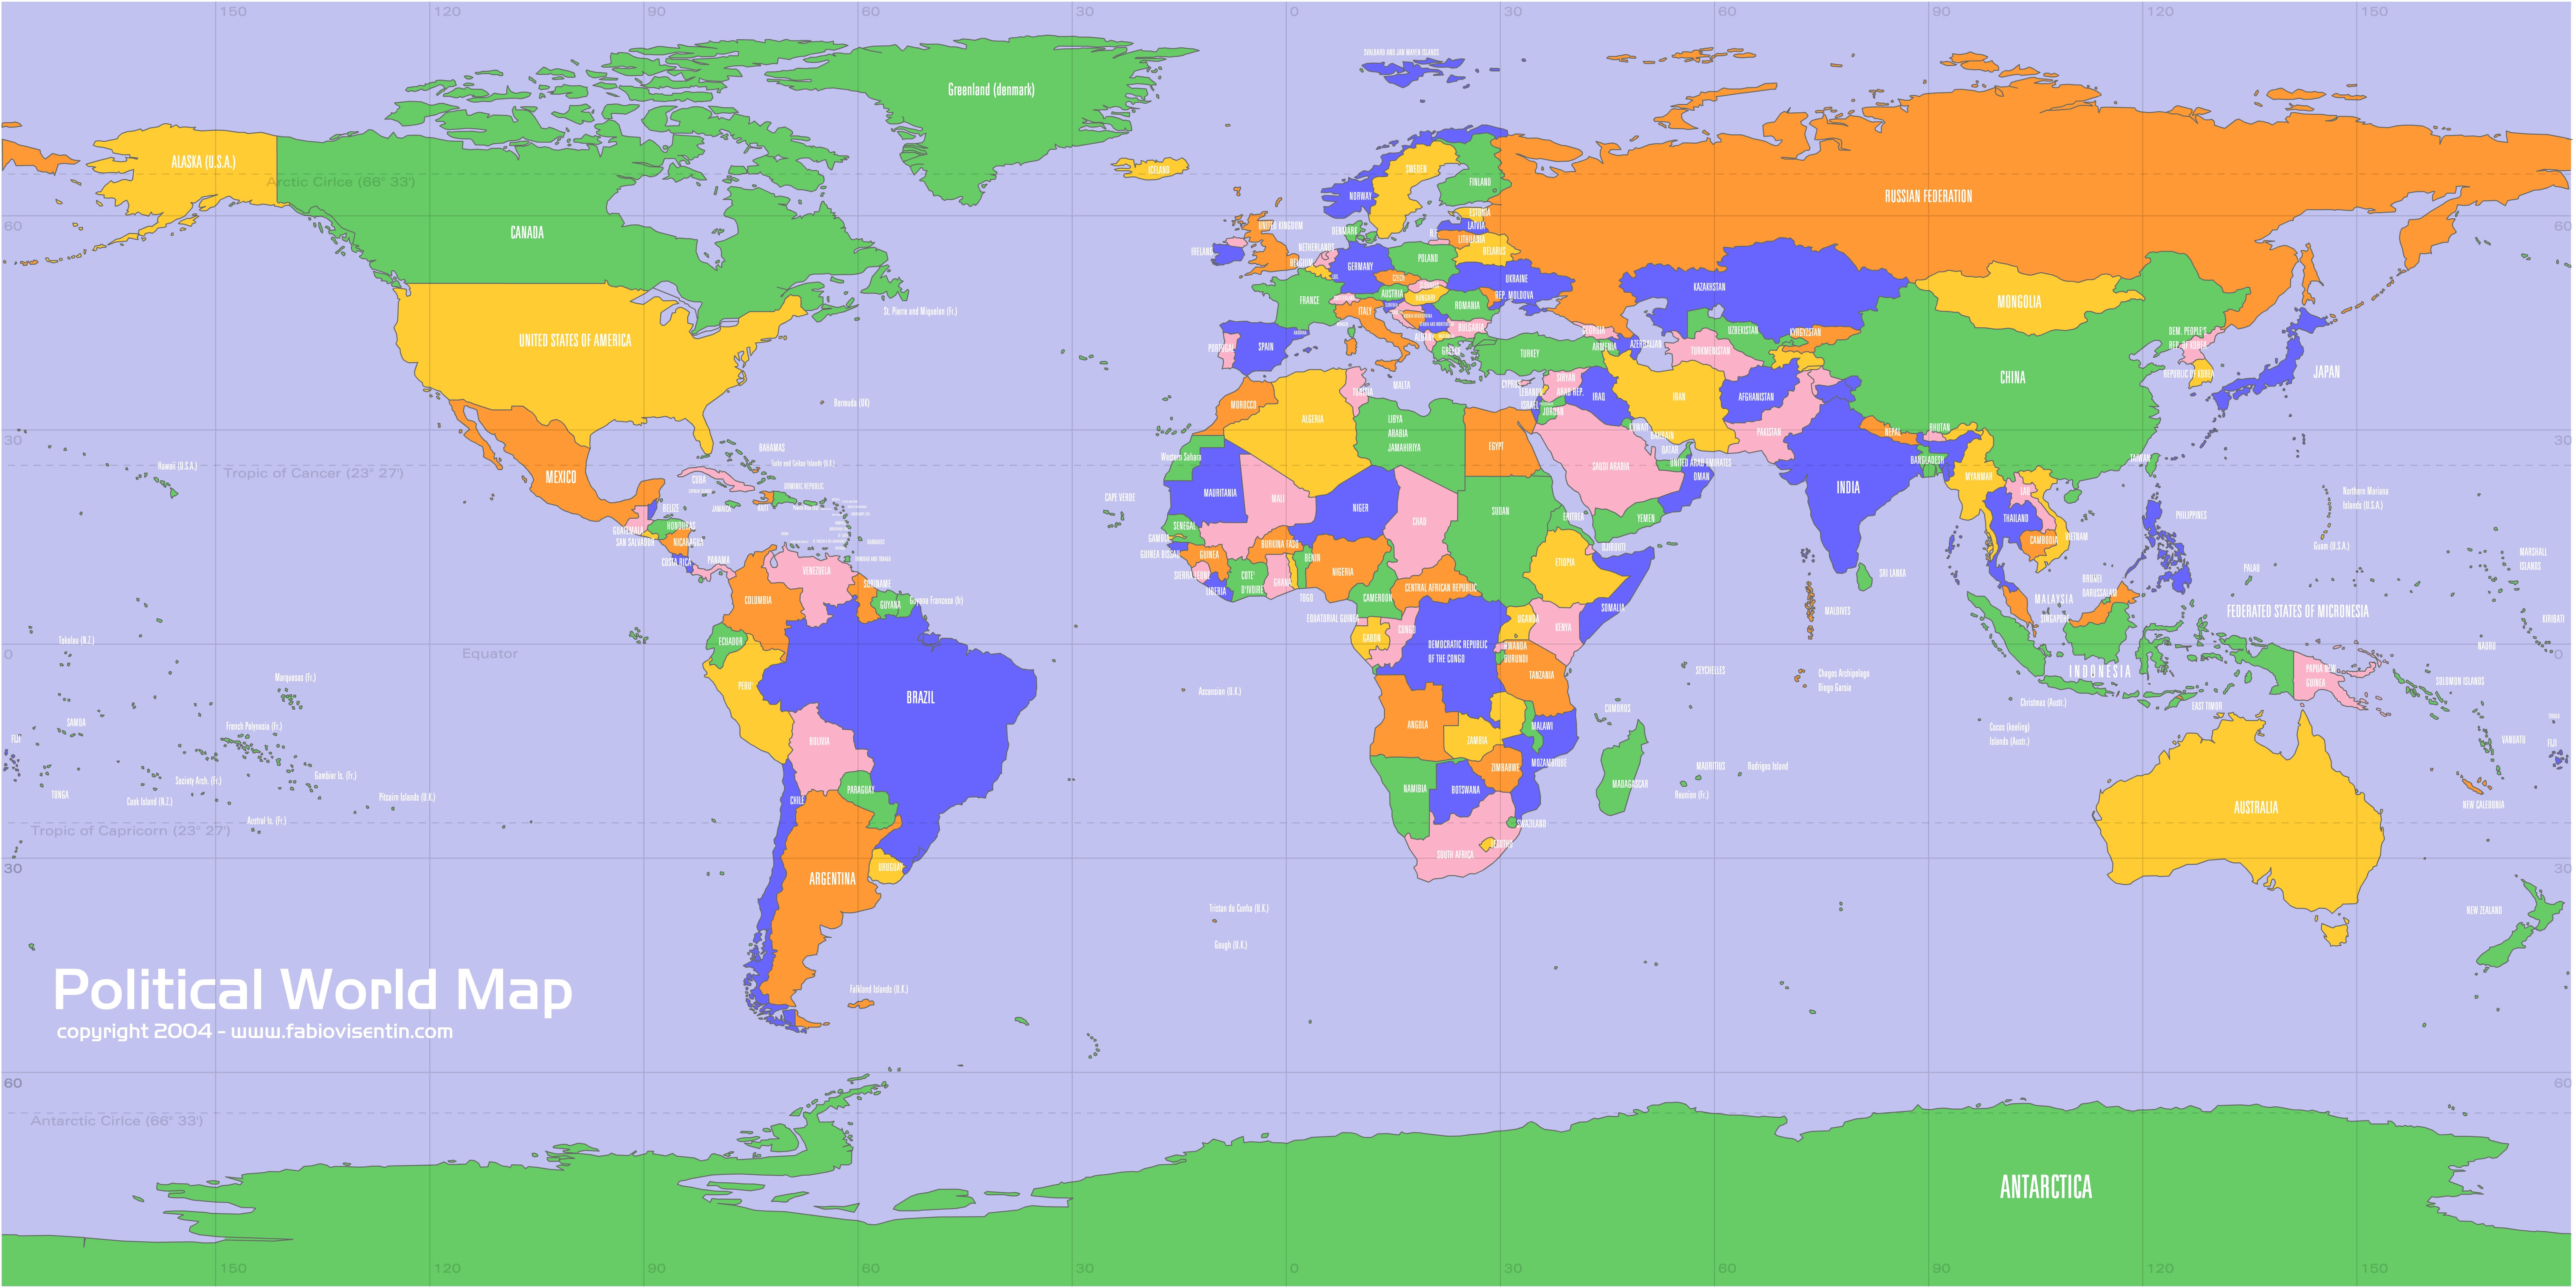 Countries on the world map